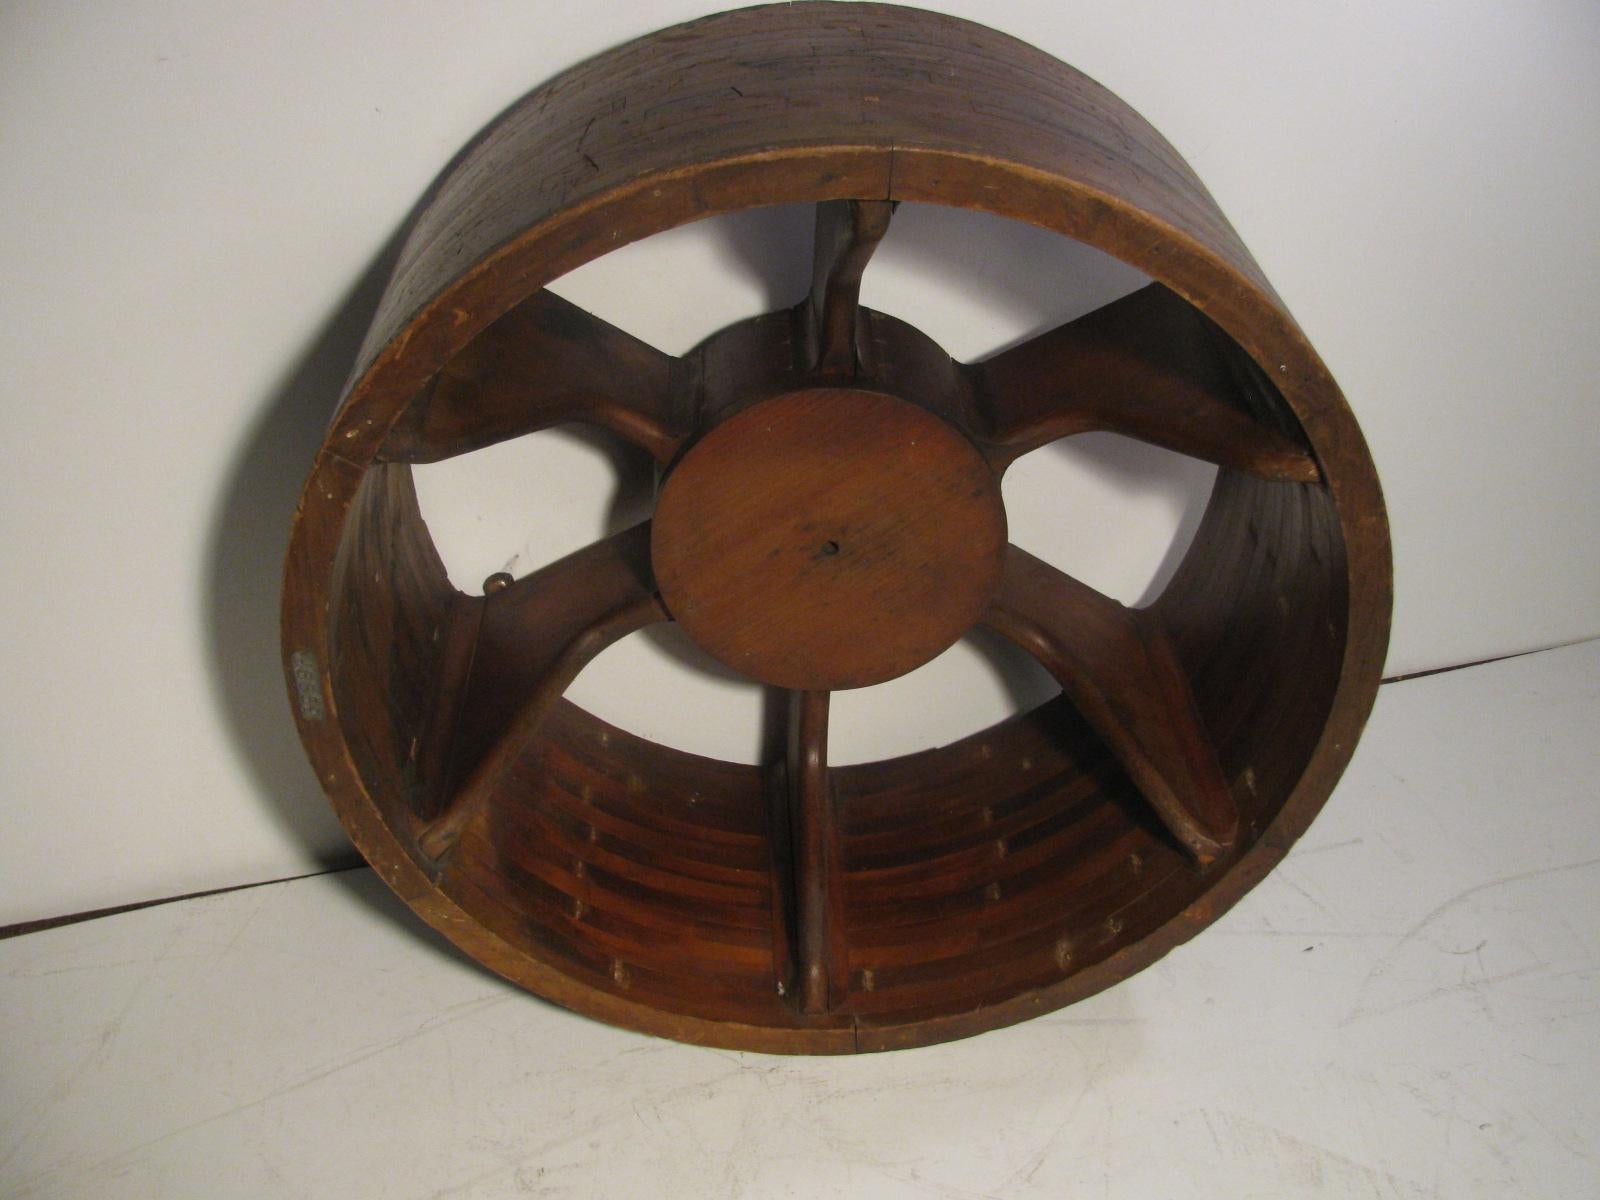 Antique architectural mold in the form of a wheel. All handmade and entirely intact. Can be hung on a wall for a unique piece of industrial sculpture or with a piece of glass on top used as a cocktail table. In excellent antique condition with